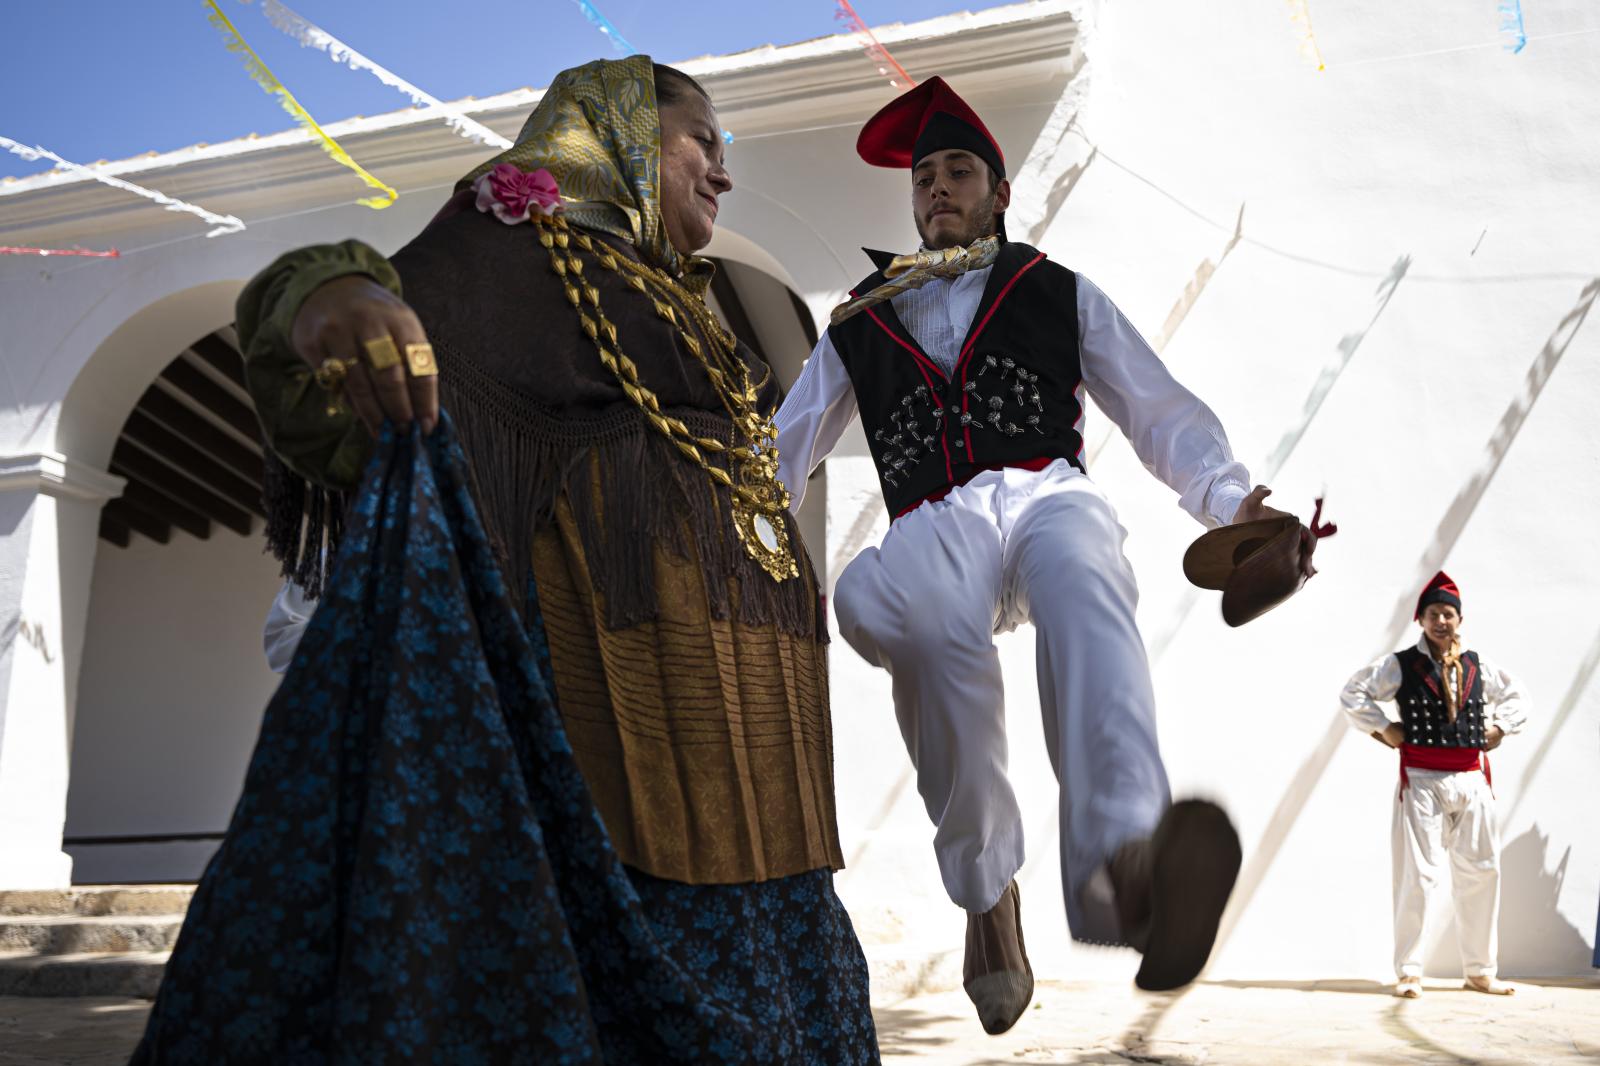 Daily News - El ball pagès is the traditional dance in Ibiza...